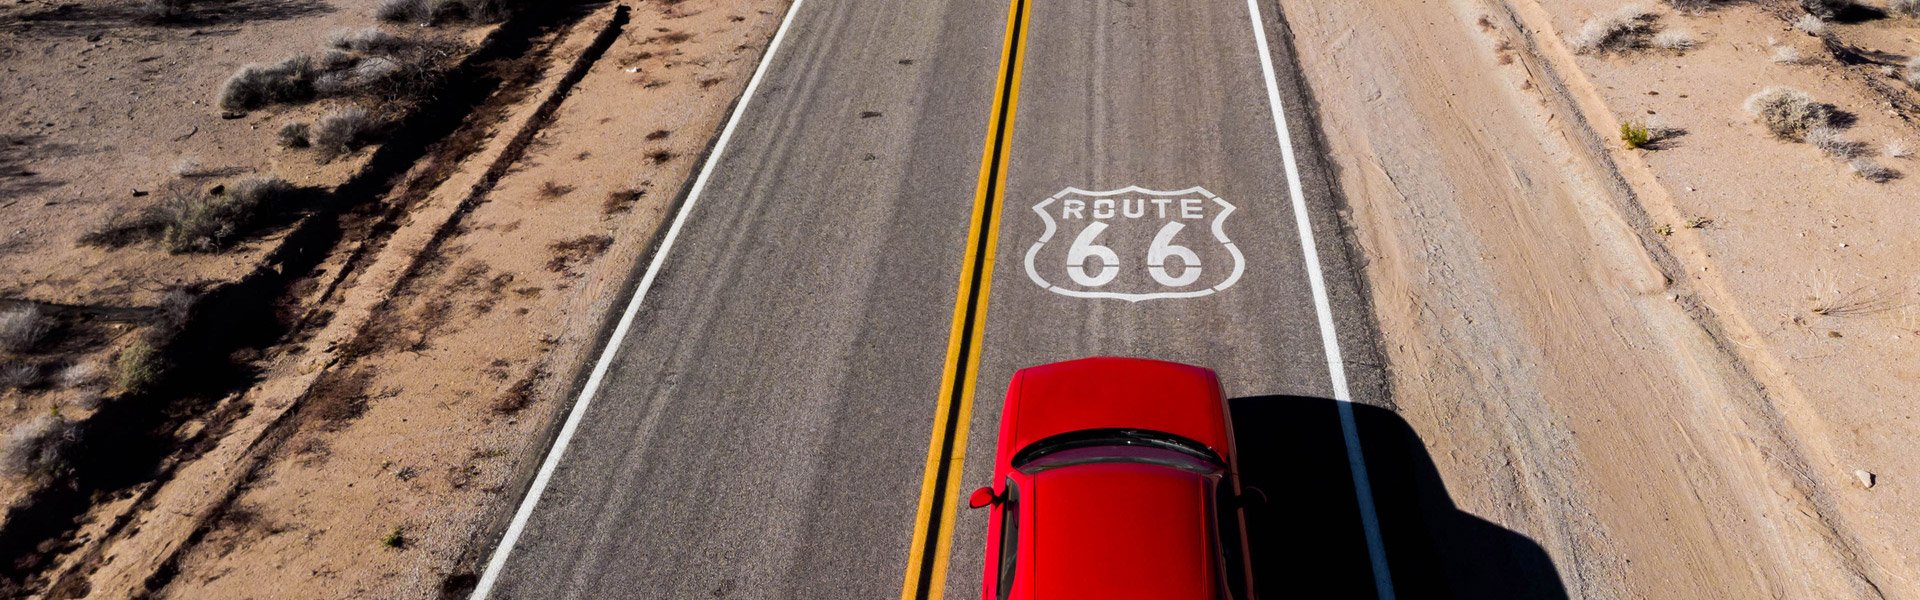 Red car on road trip down route 66